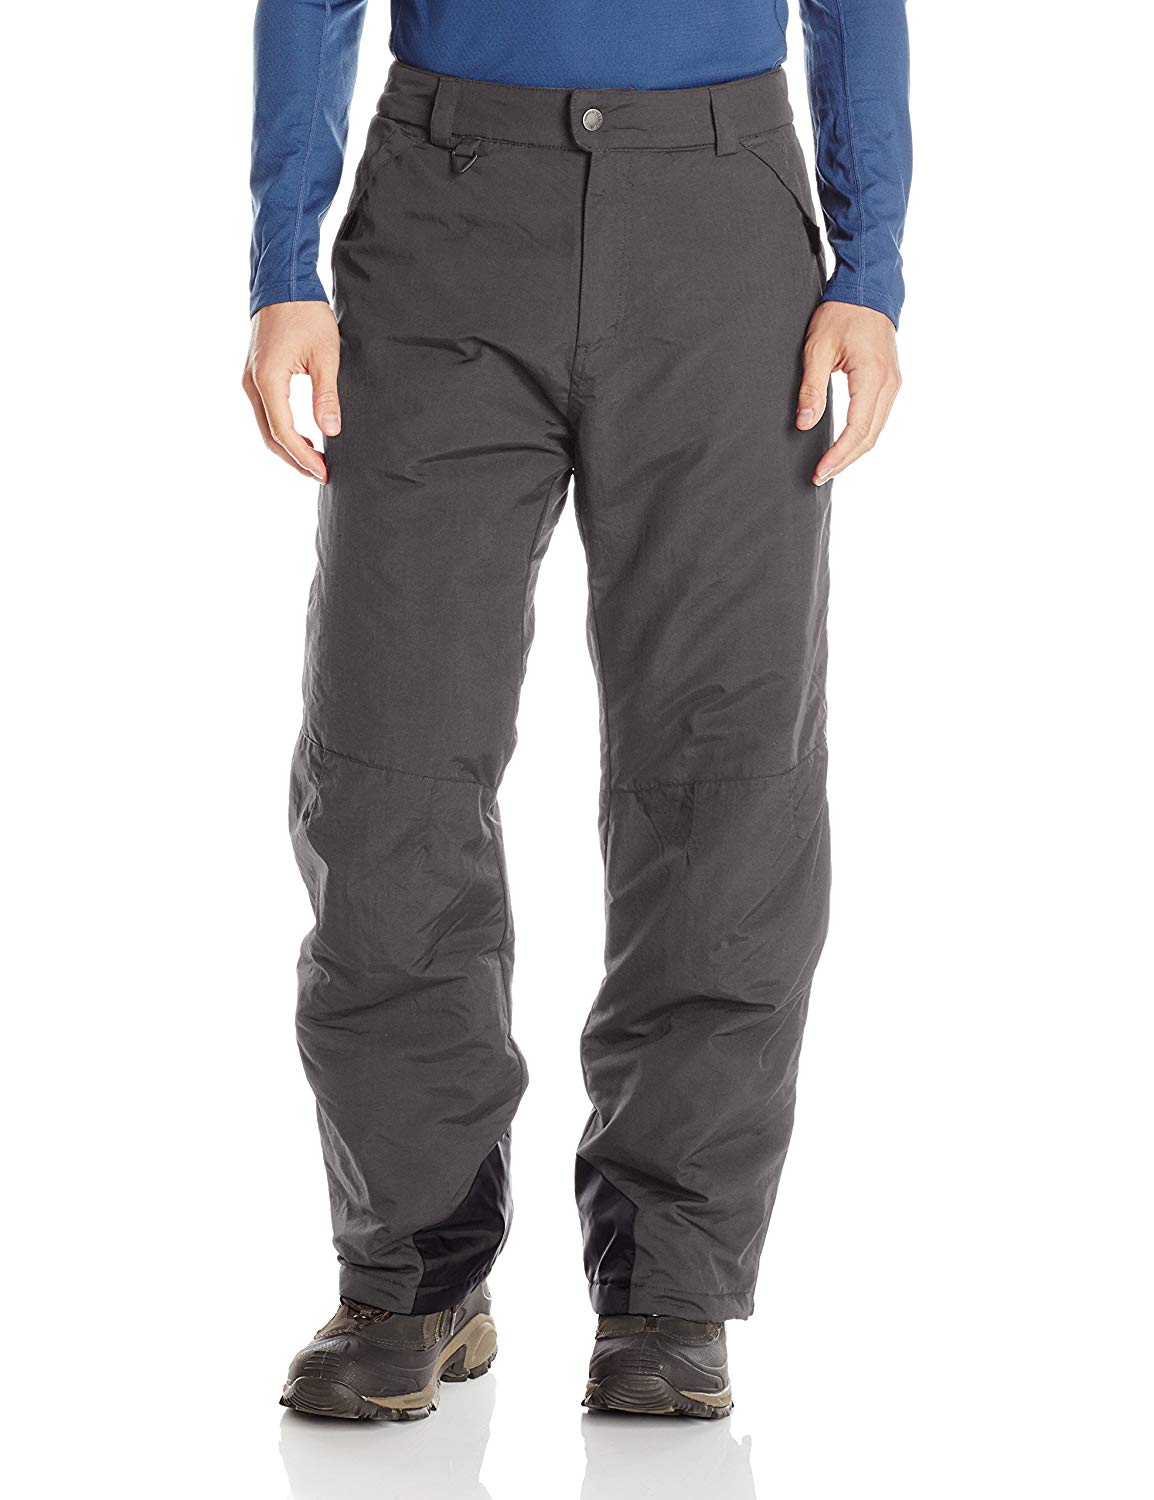 Top 10 Best Men's Insulated Mountaineering Pants 2018 - Top Value Reviews